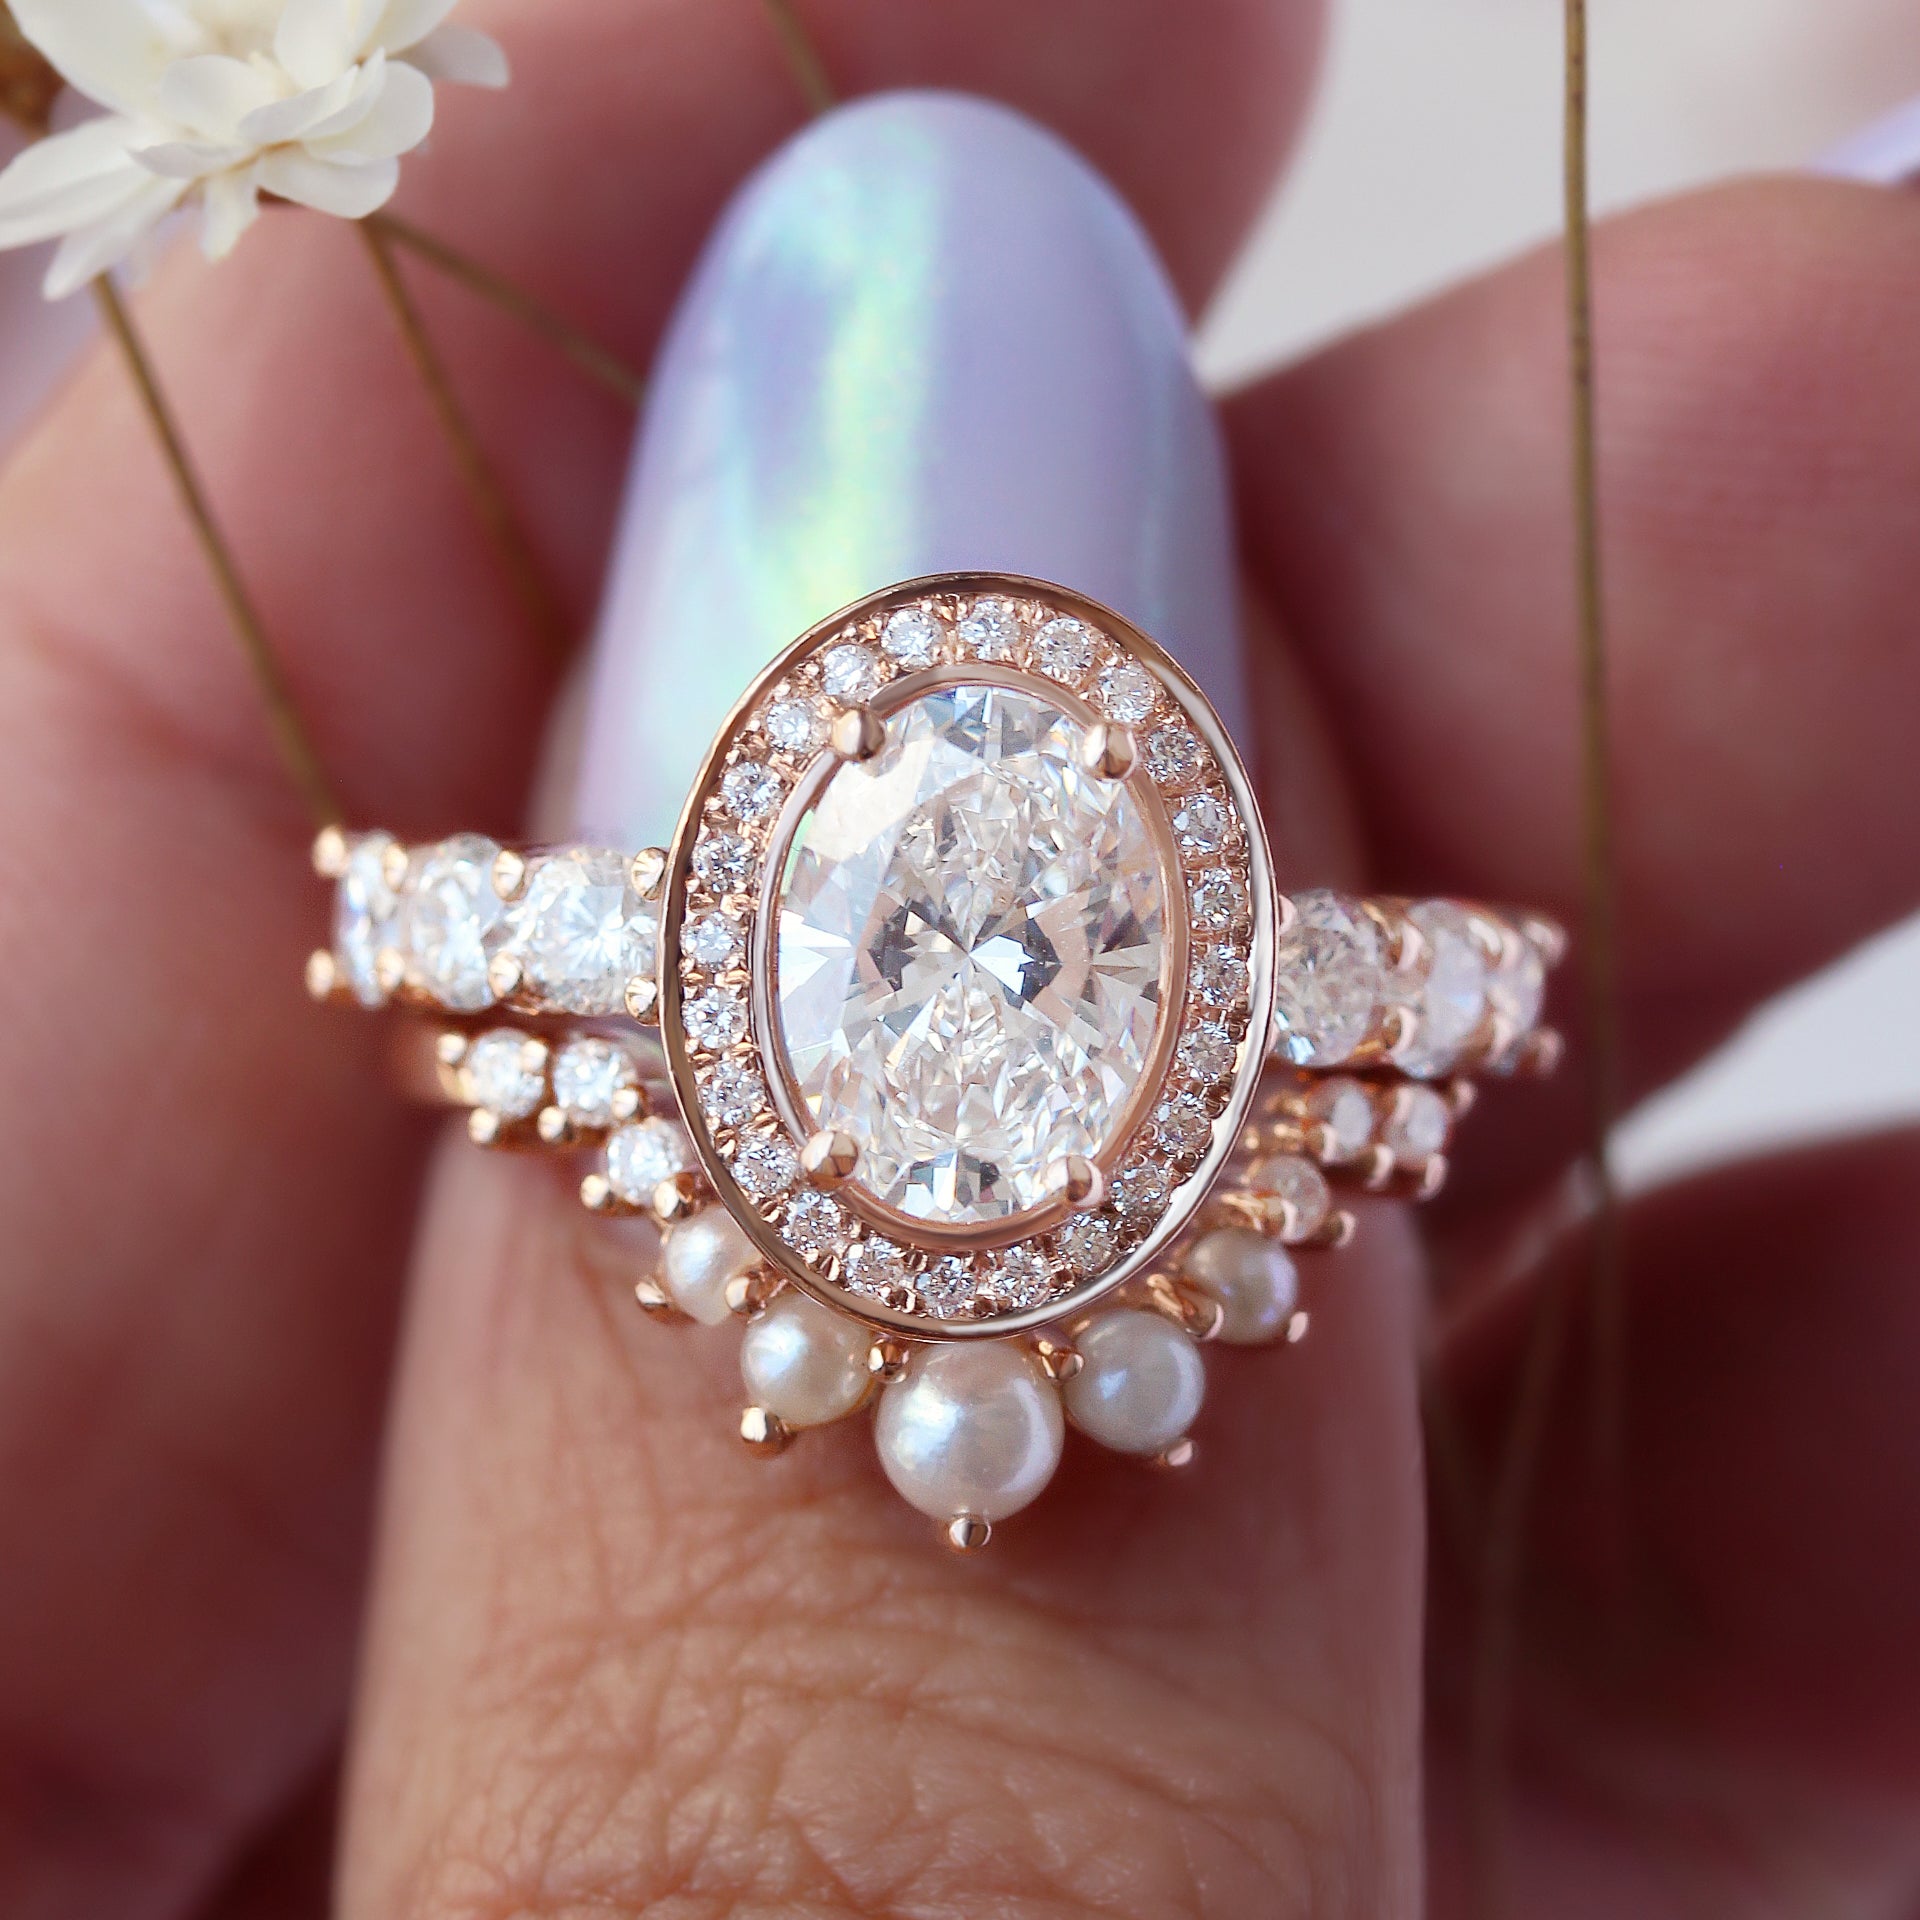 Top 3 most Popular engagement ring types